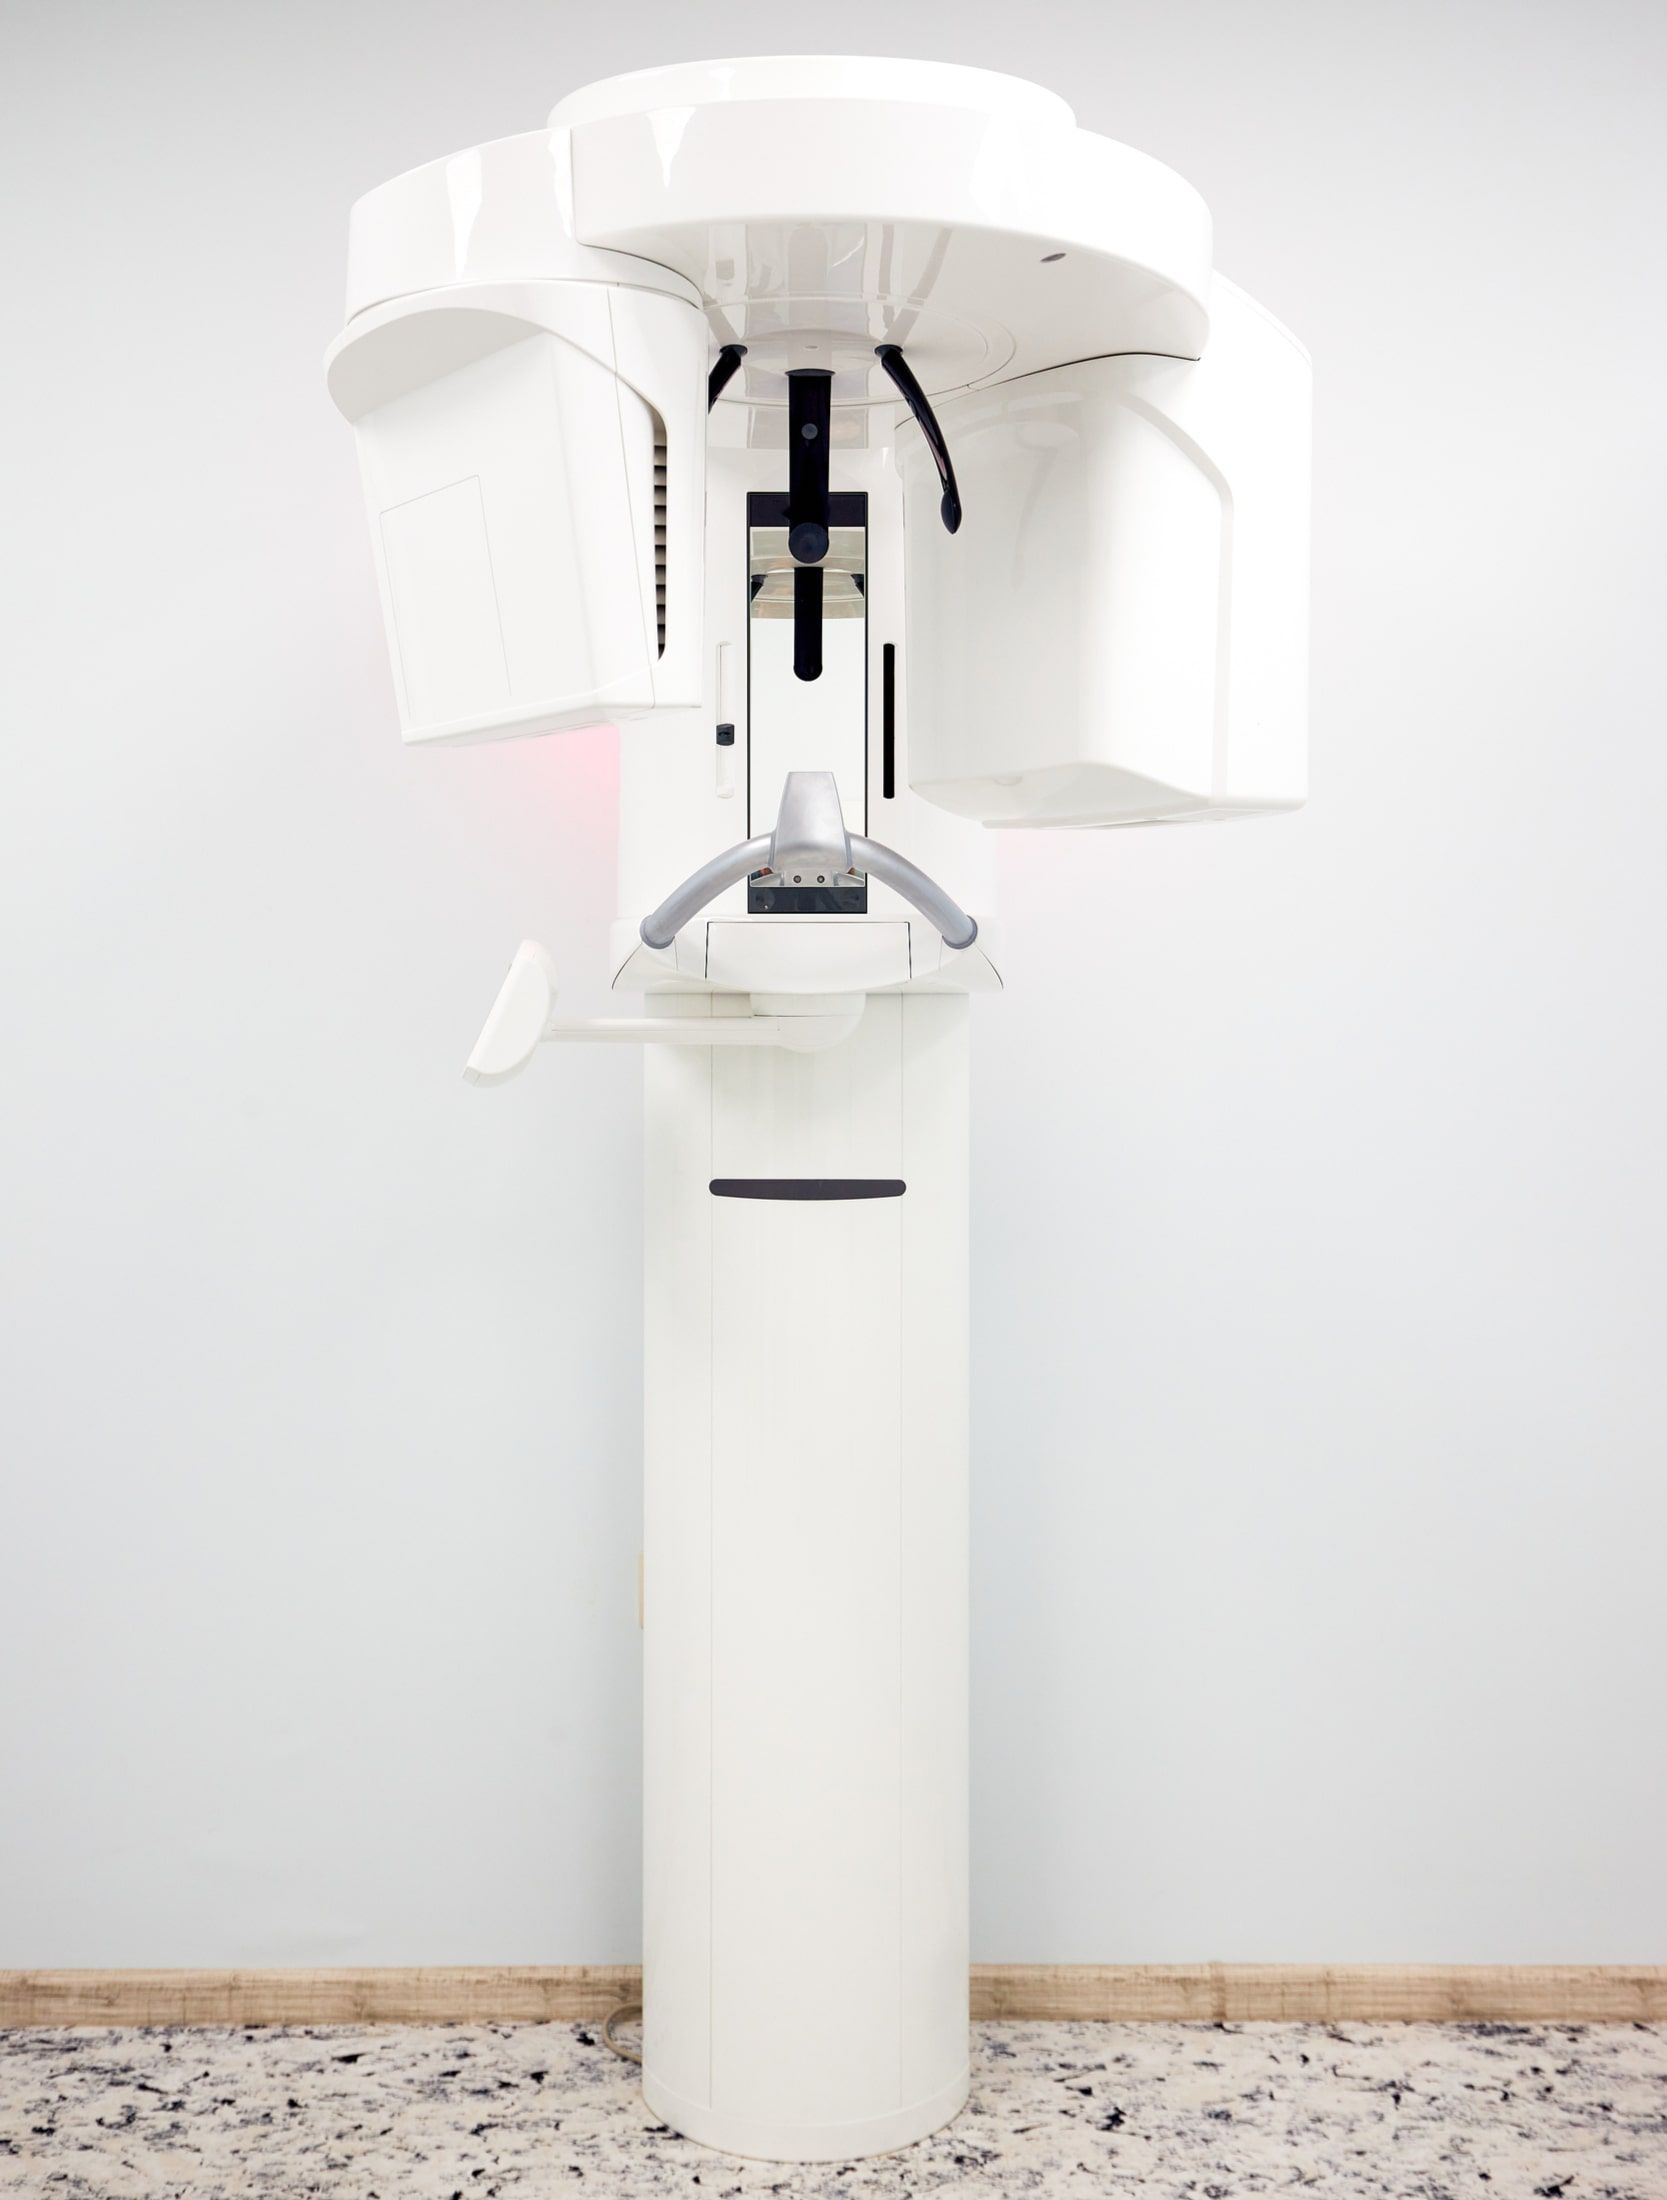 Cone beam computed tomography scanner